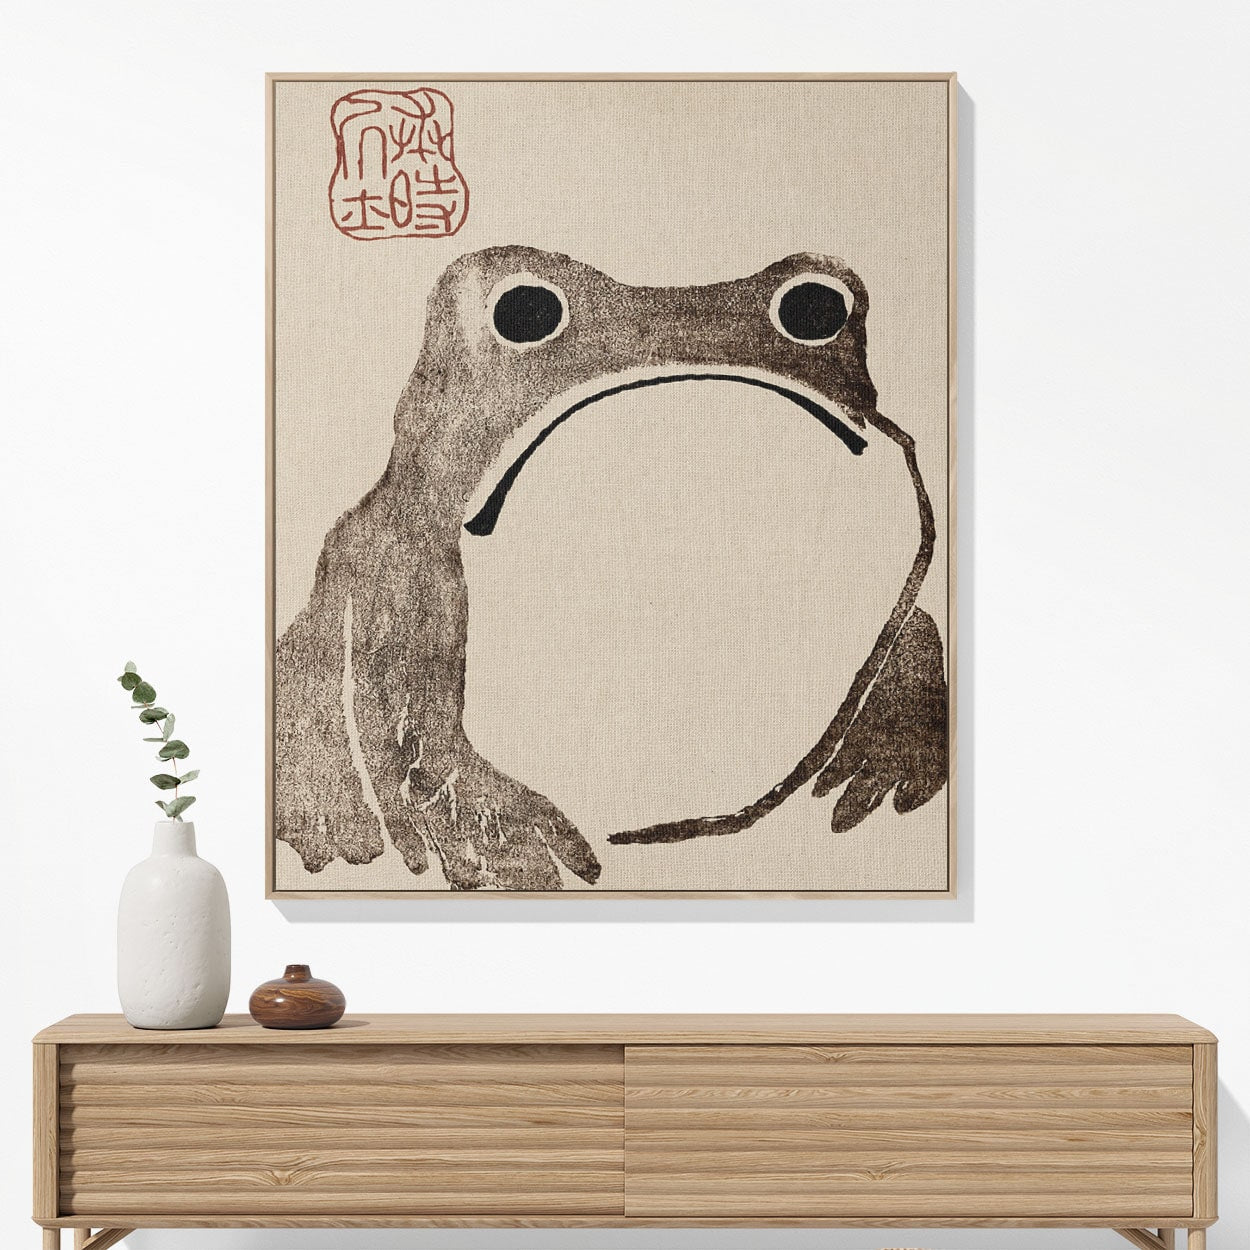 Grumpy Frog Woven Blanket Woven Blanket Hanging on a Wall as Framed Wall Art